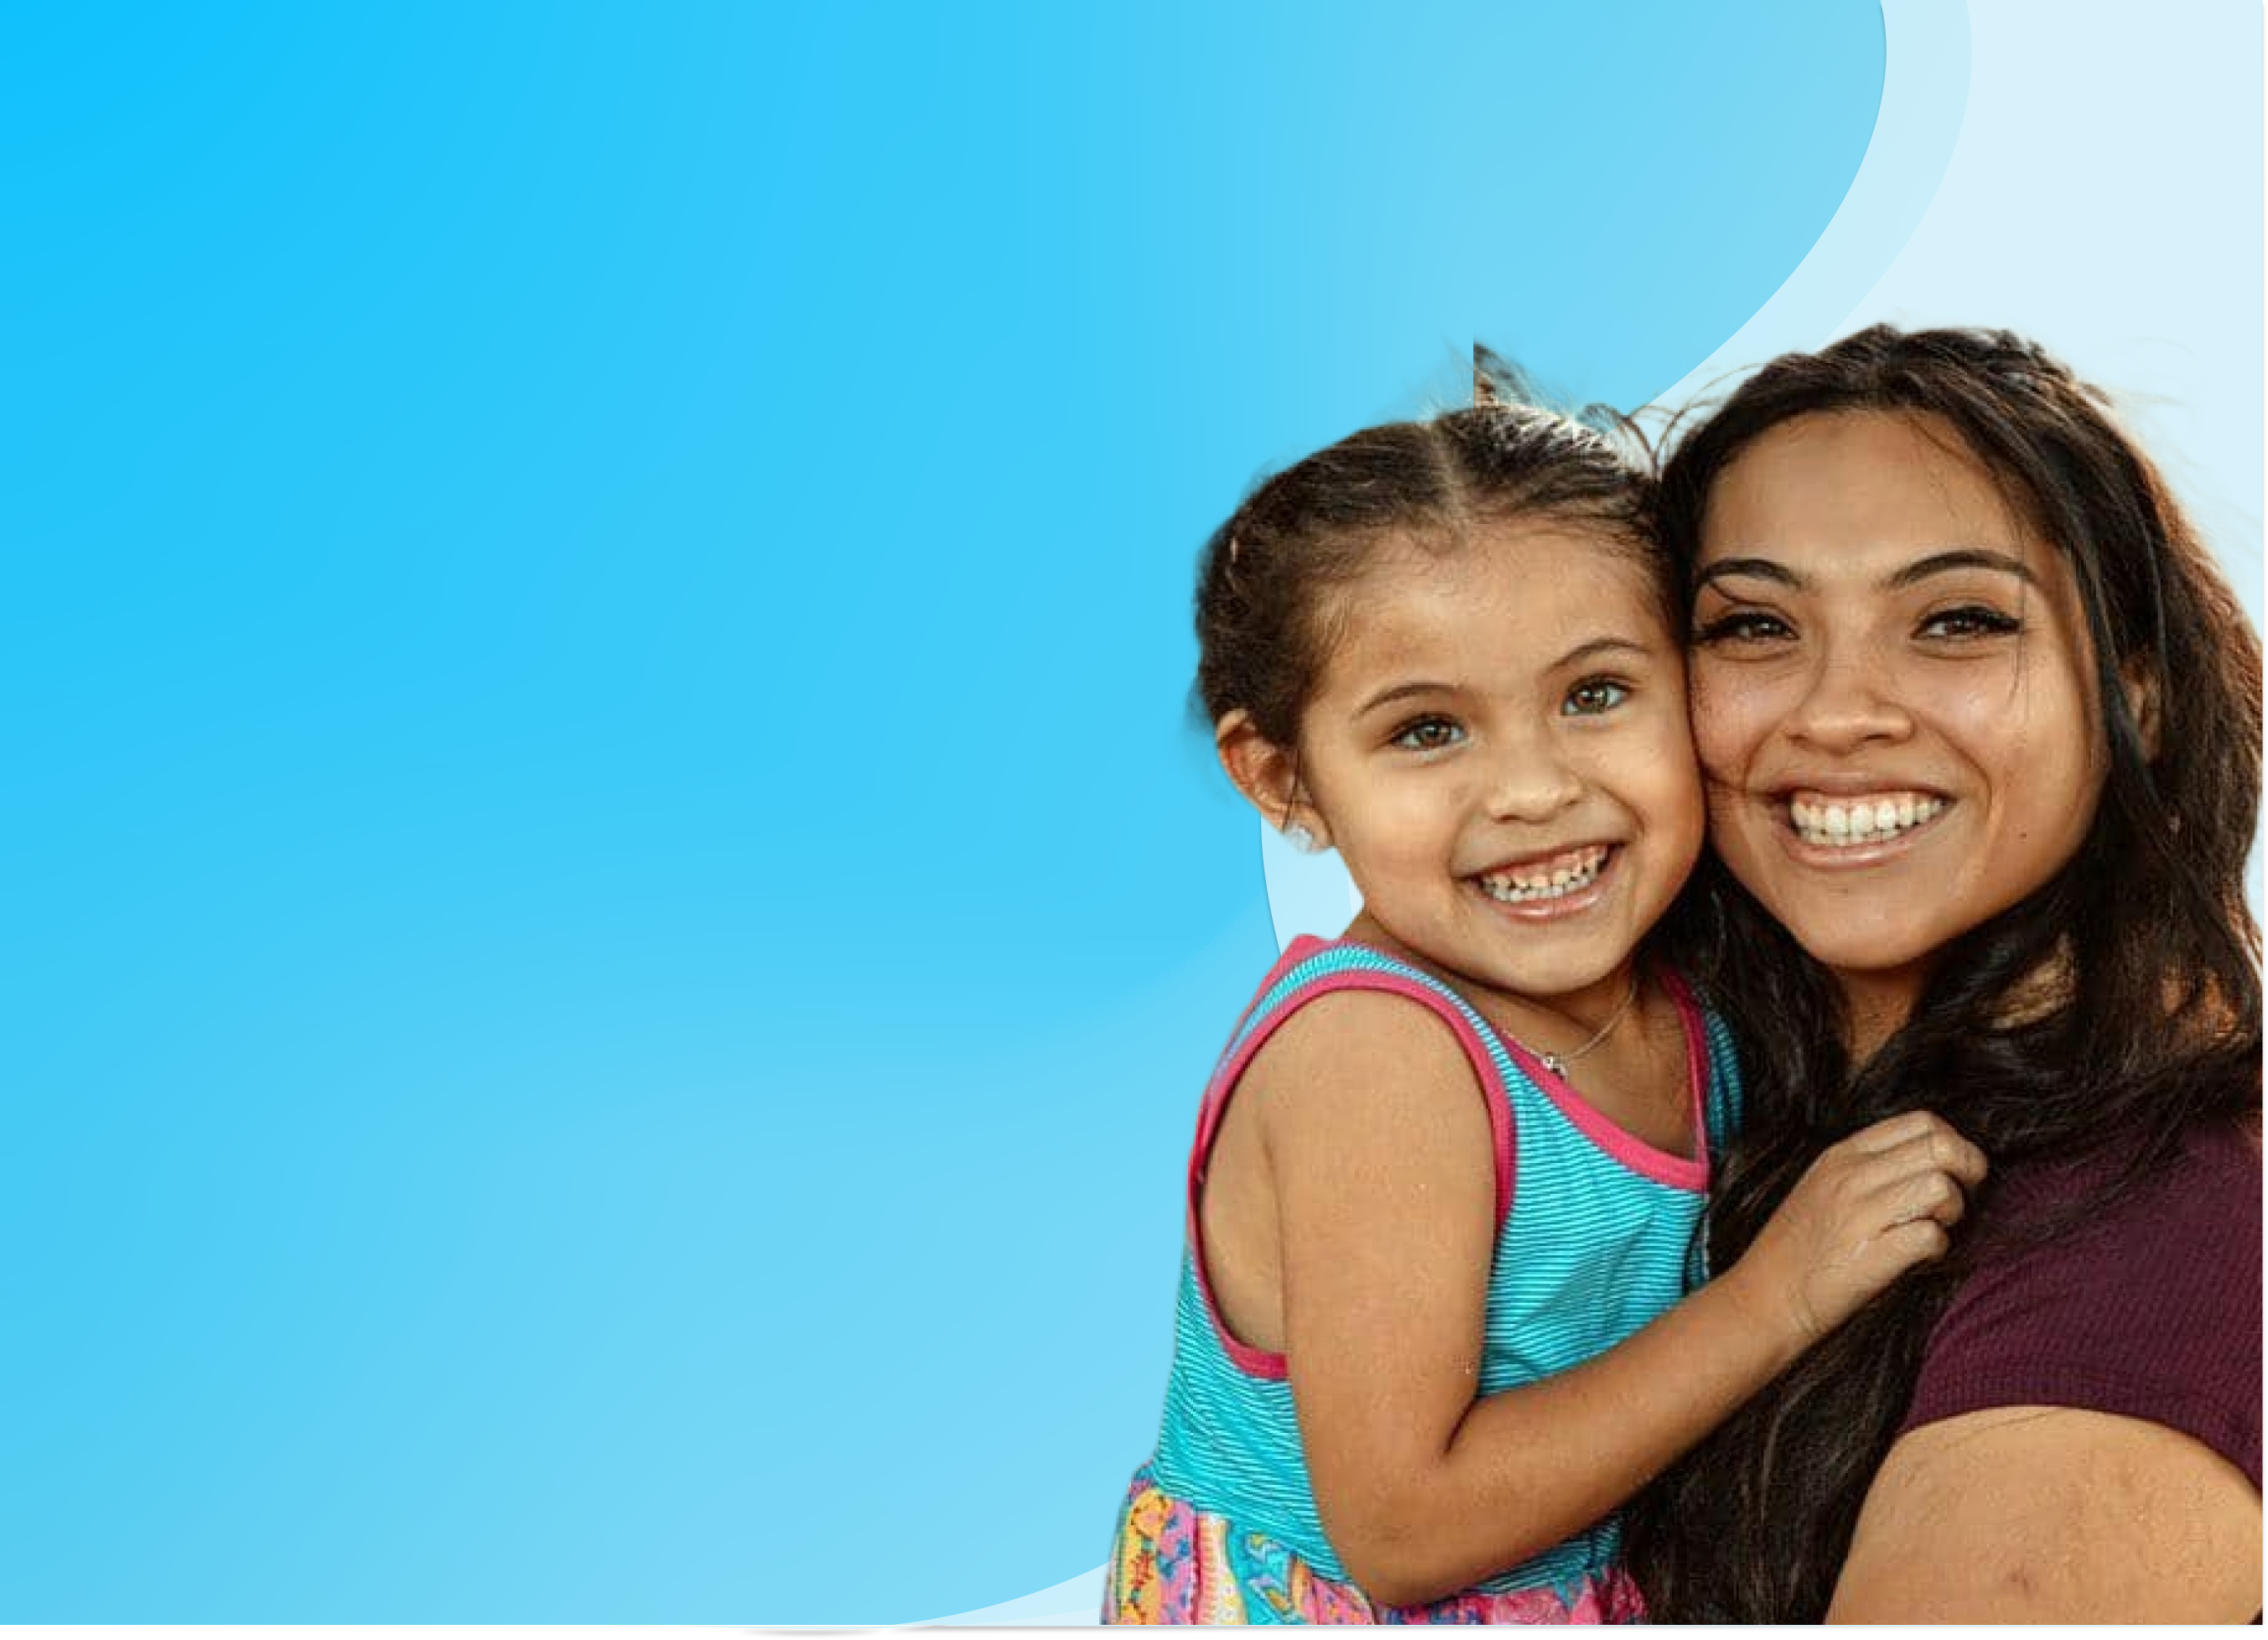 Background Image, Mother smiling holding her daughter